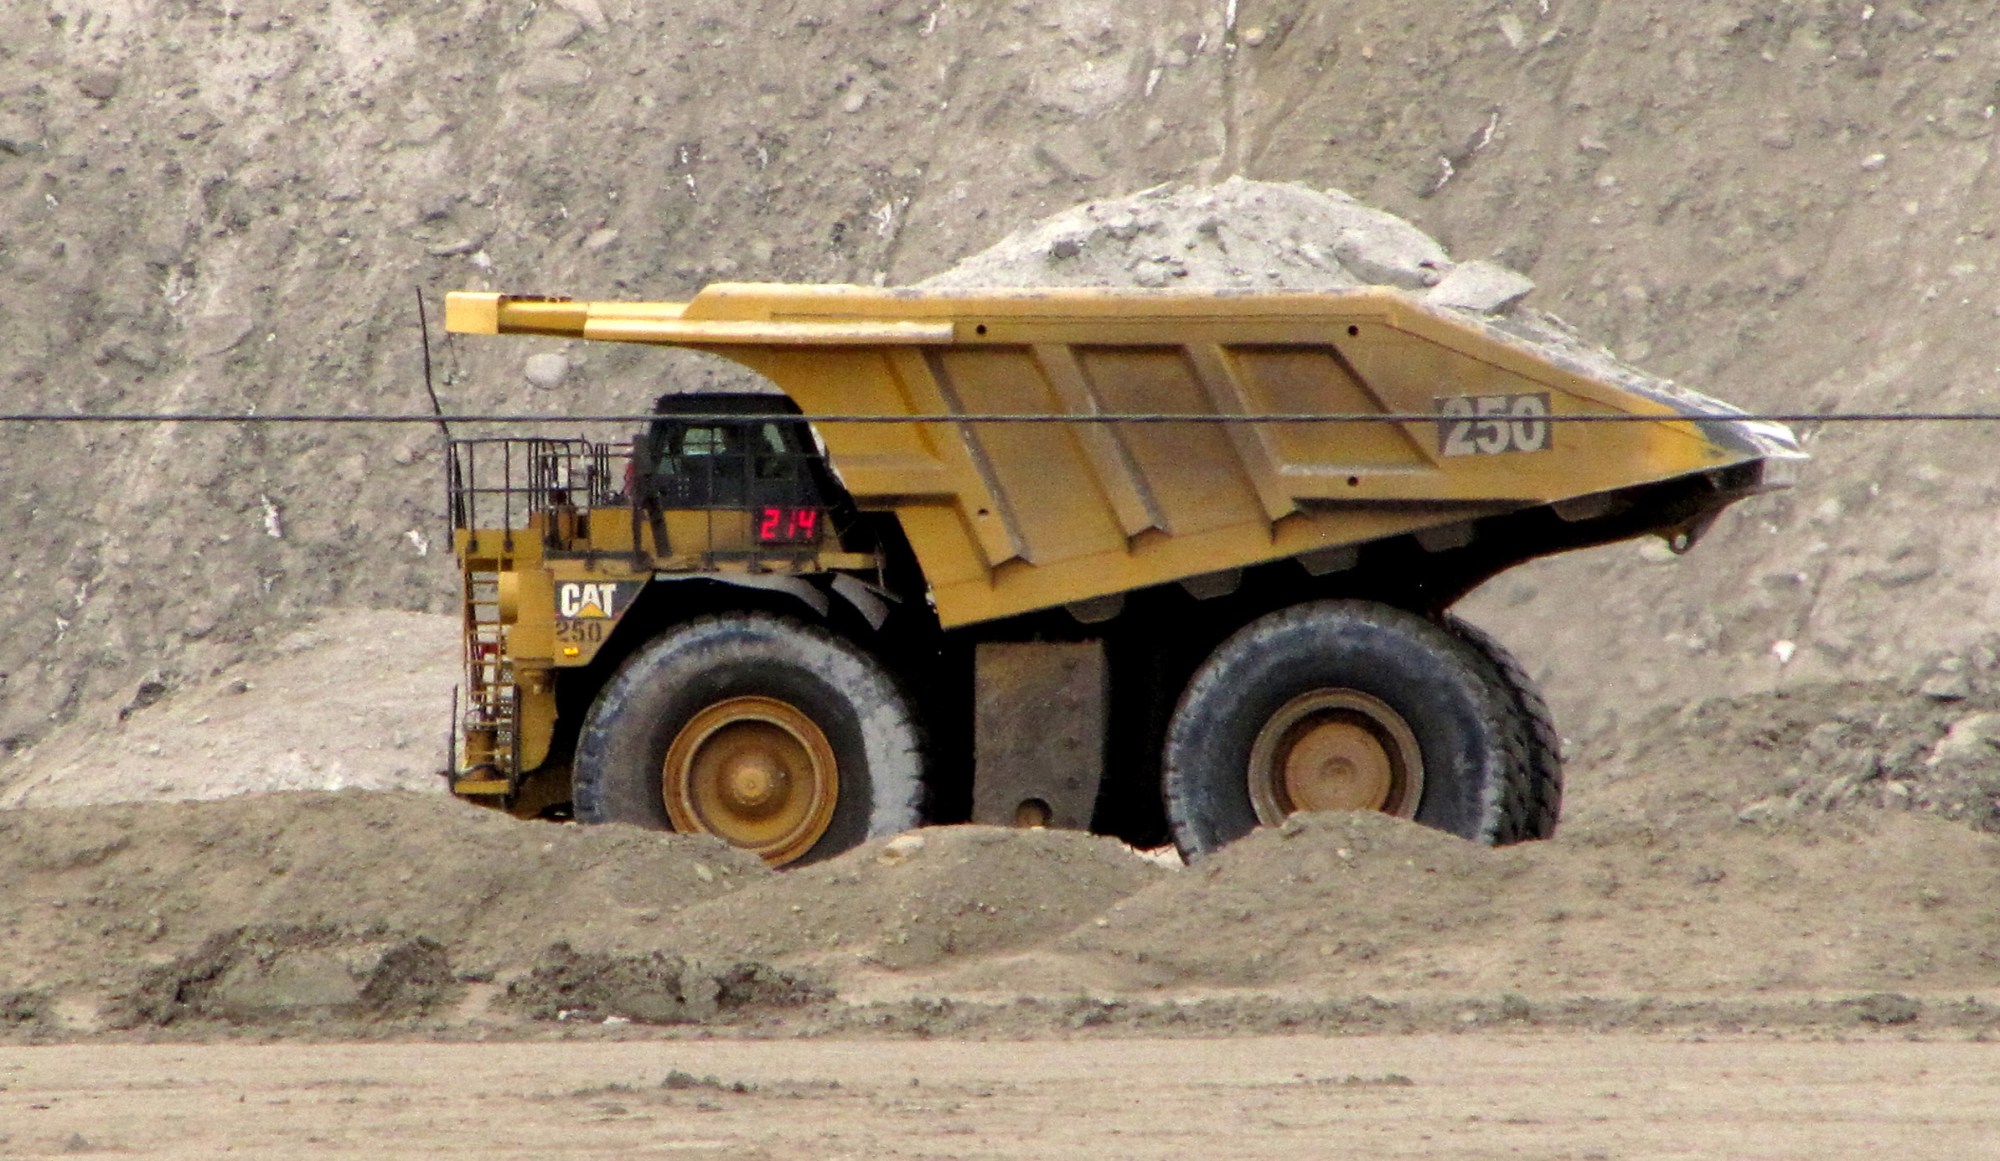 A house-sized dump truck at the Black Thunder coal mine in the Powder River Basin near Wright, Wyoming, on March 26, 2013. (AP/Mead Gruver)